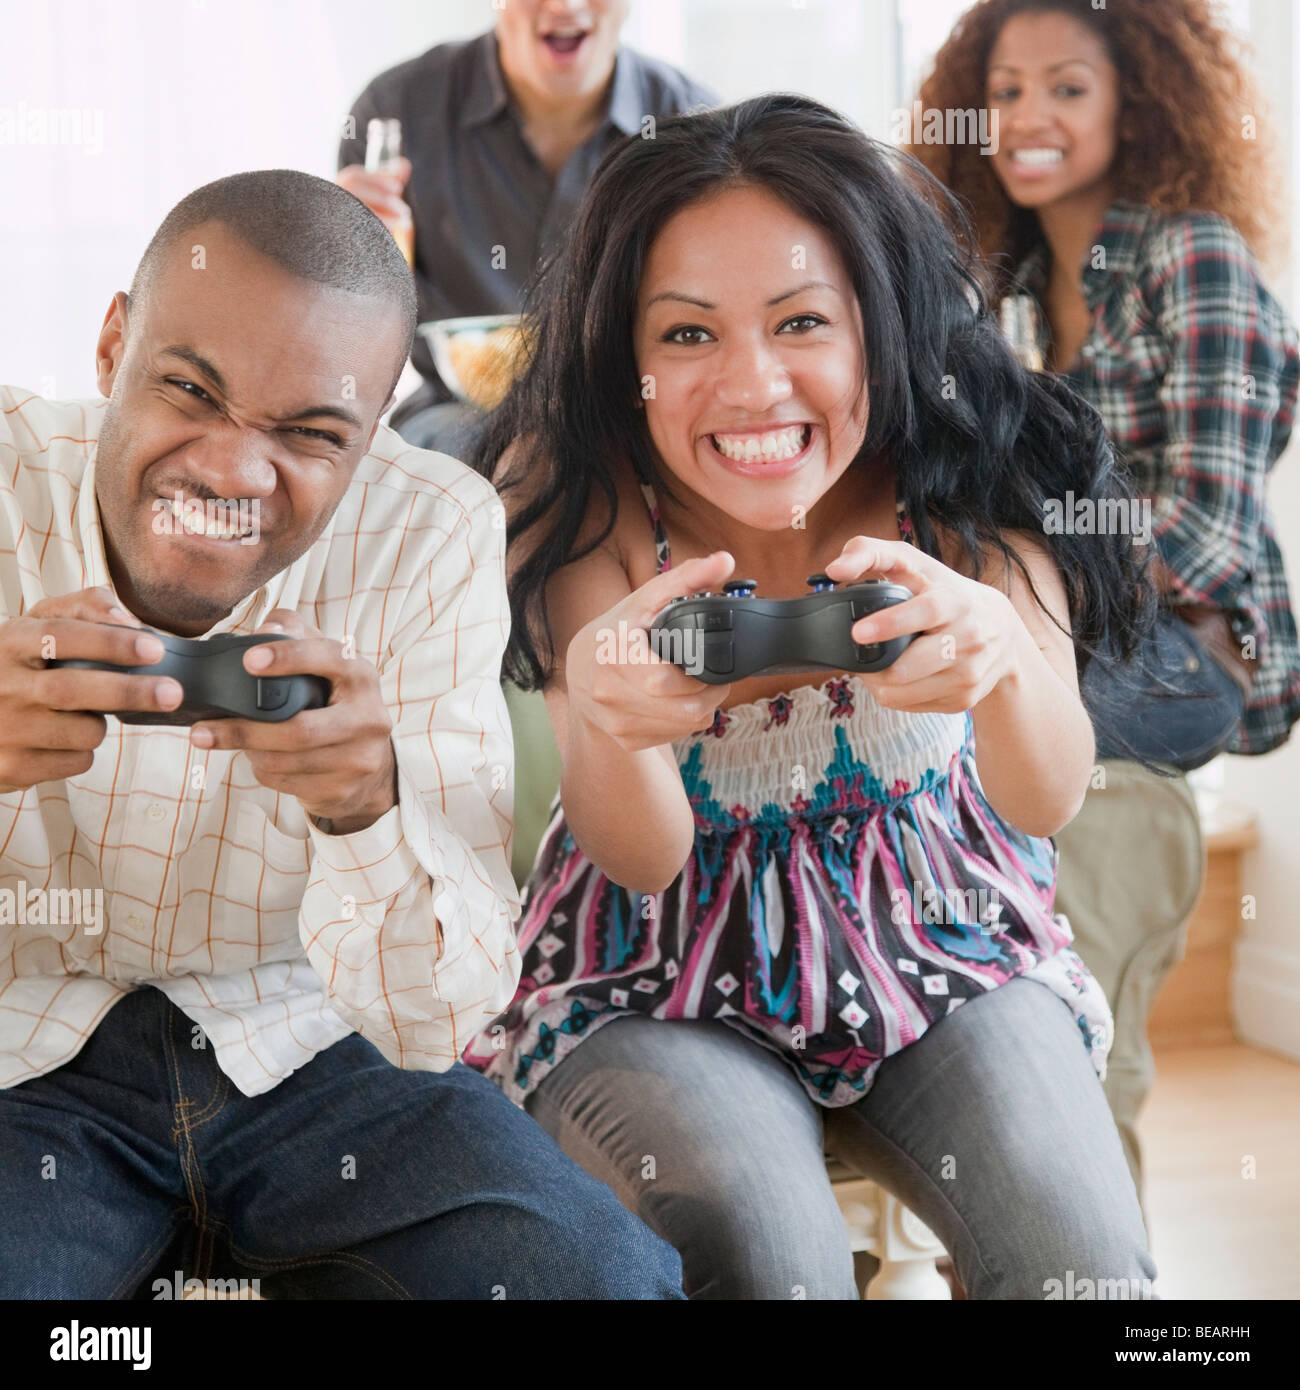 Man and woman playing video game and making faces Stock Photo